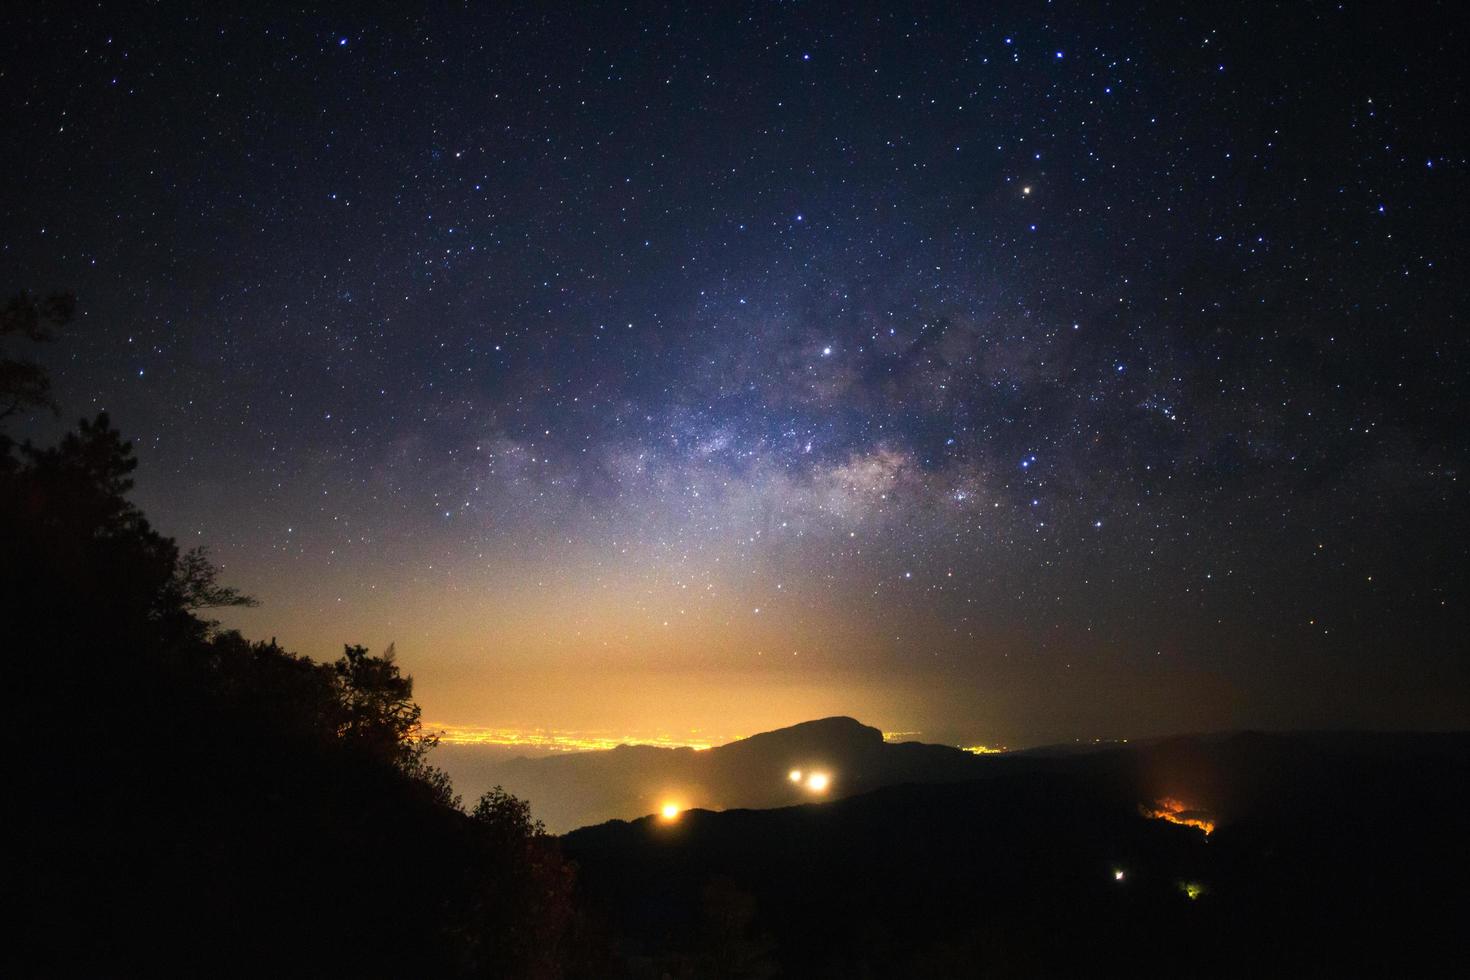 Milky way galaxy with stars and space dust in the universe at Doi inthanon Chiang mai, Thailand photo